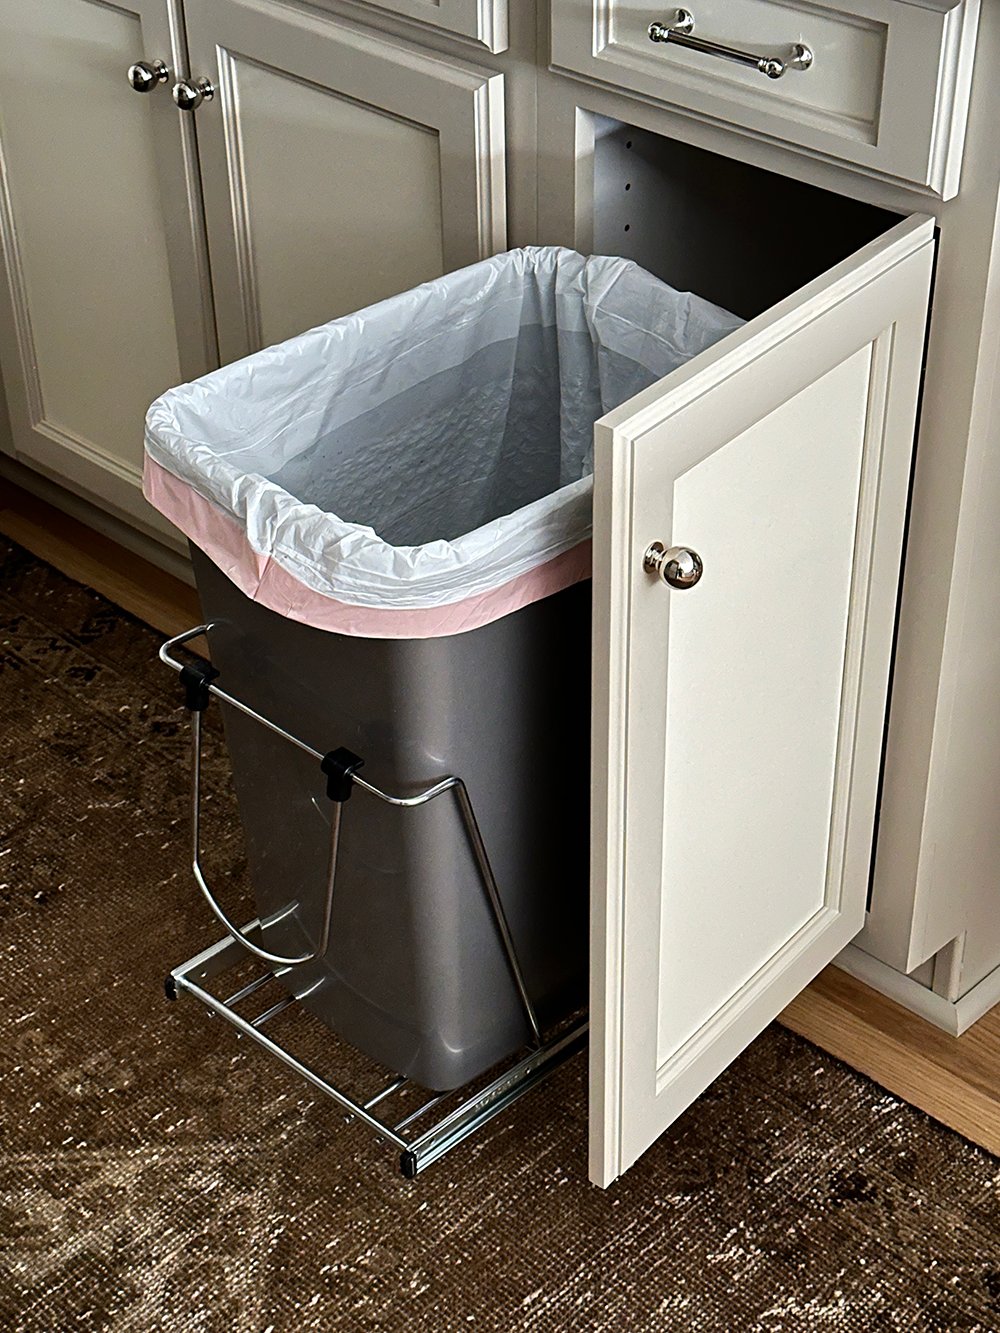 How to Install a Hidden Kitchen Trash Can - roomfortuesday.com